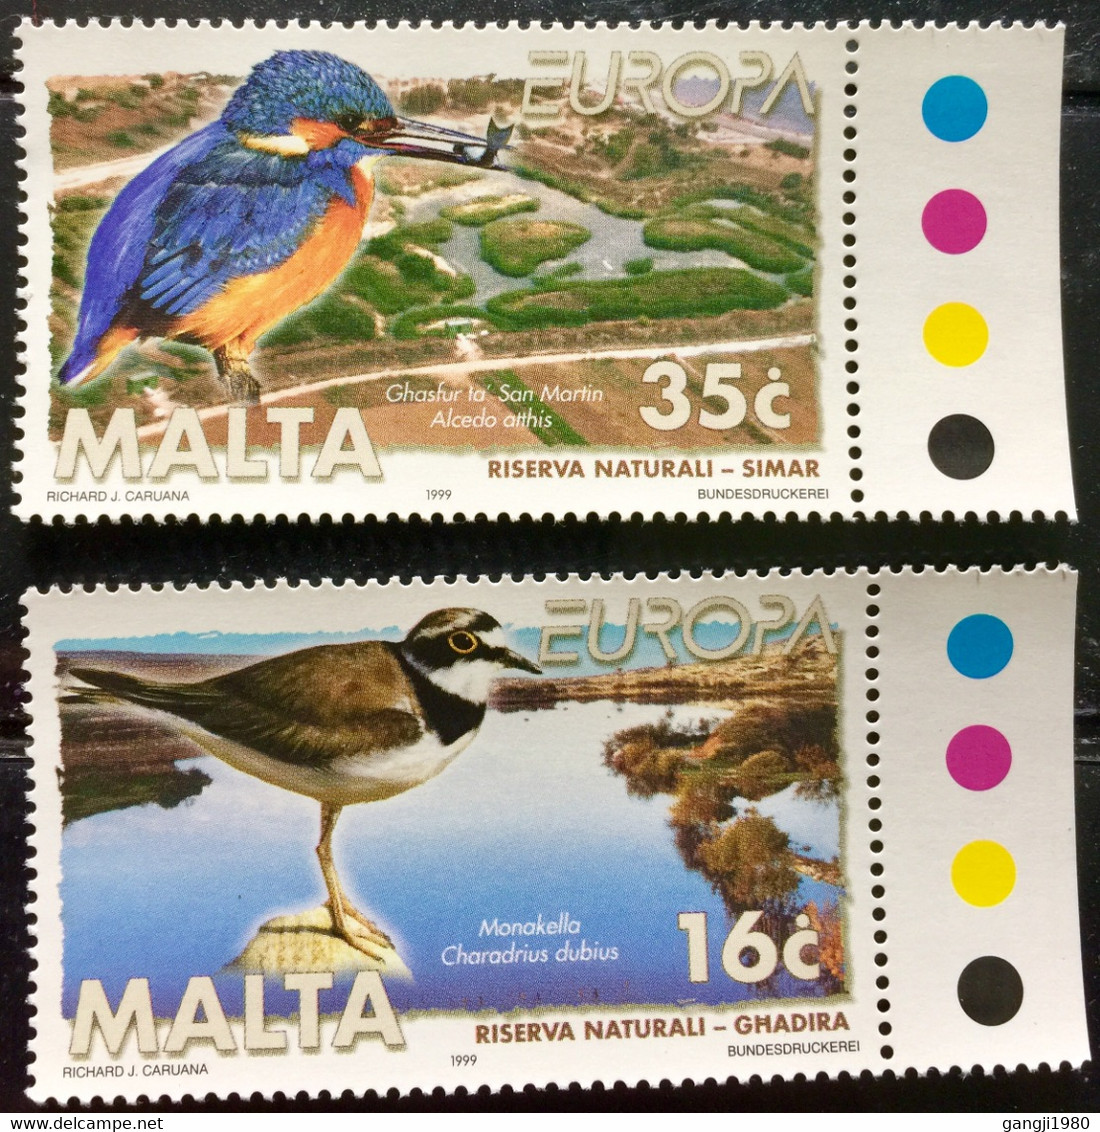 MALTA 1999 MNH STAMP ON EUROPA, NATIONAL PARK, BIRDS & WATER IMAGE  WITH COLOUR CODE2 DIFFERENT STAMPS - Malte